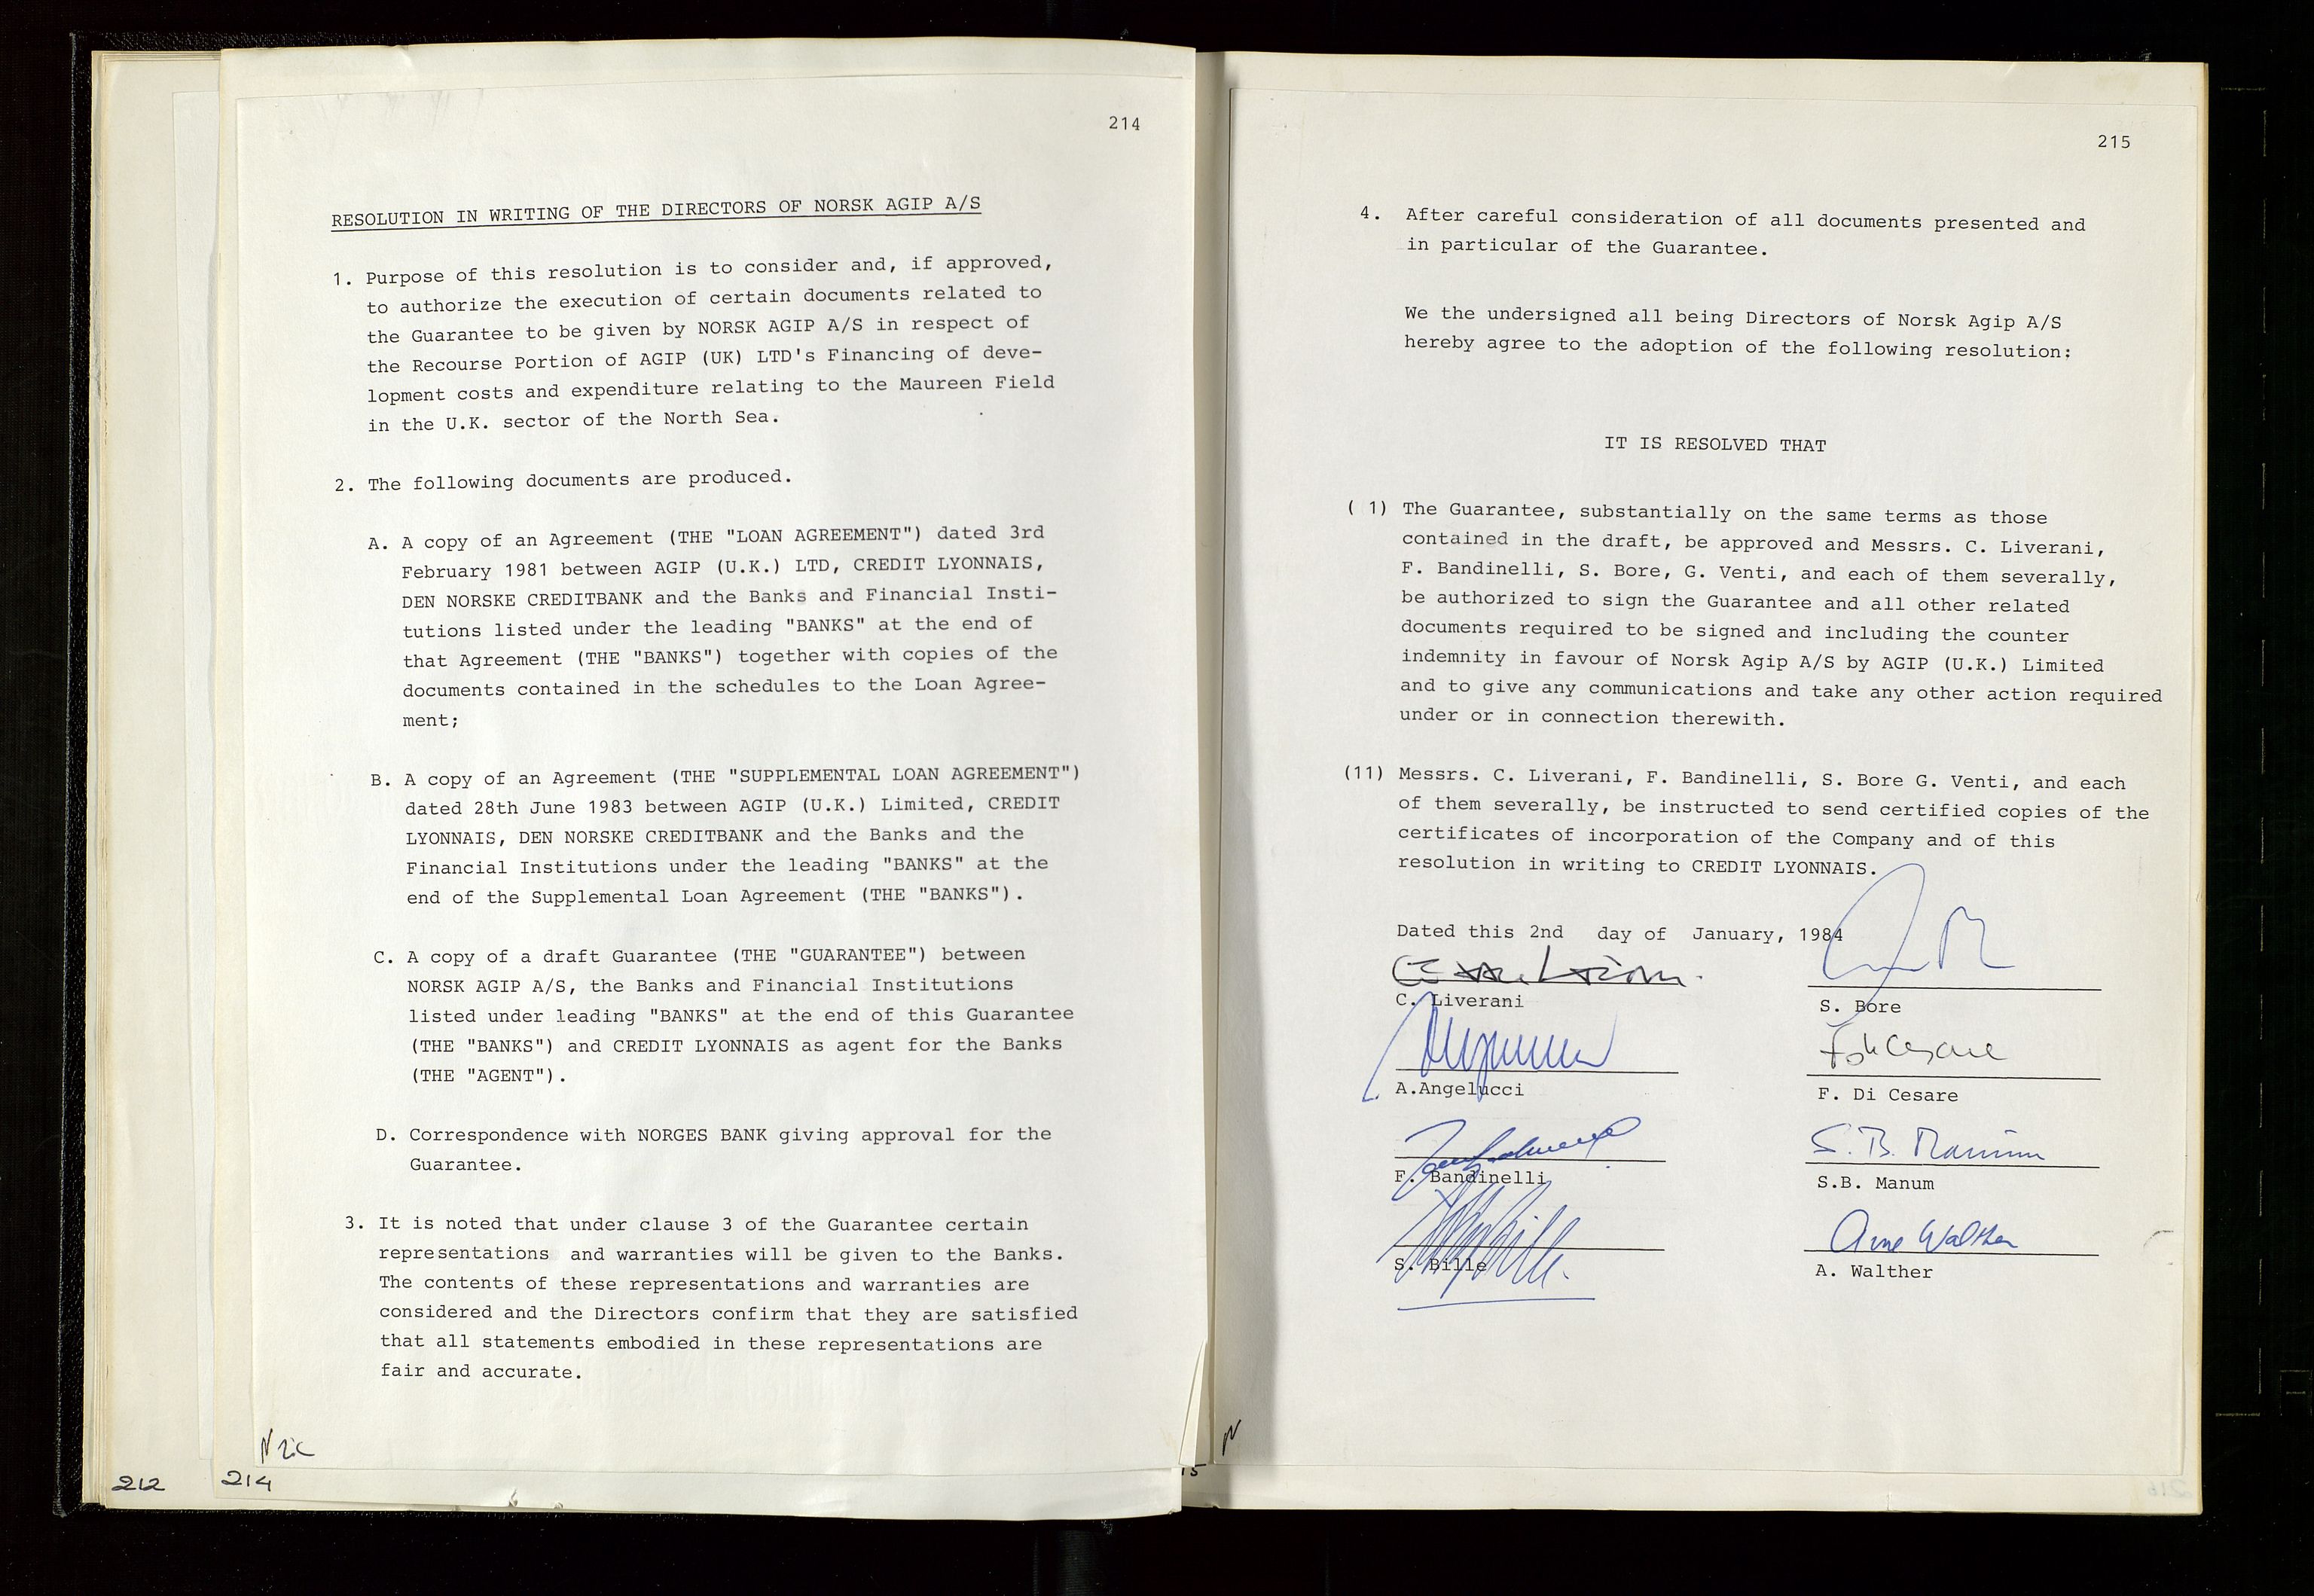 Pa 1583 - Norsk Agip AS, SAST/A-102138/A/Aa/L0003: Board of Directors meeting minutes, 1979-1983, s. 214-215